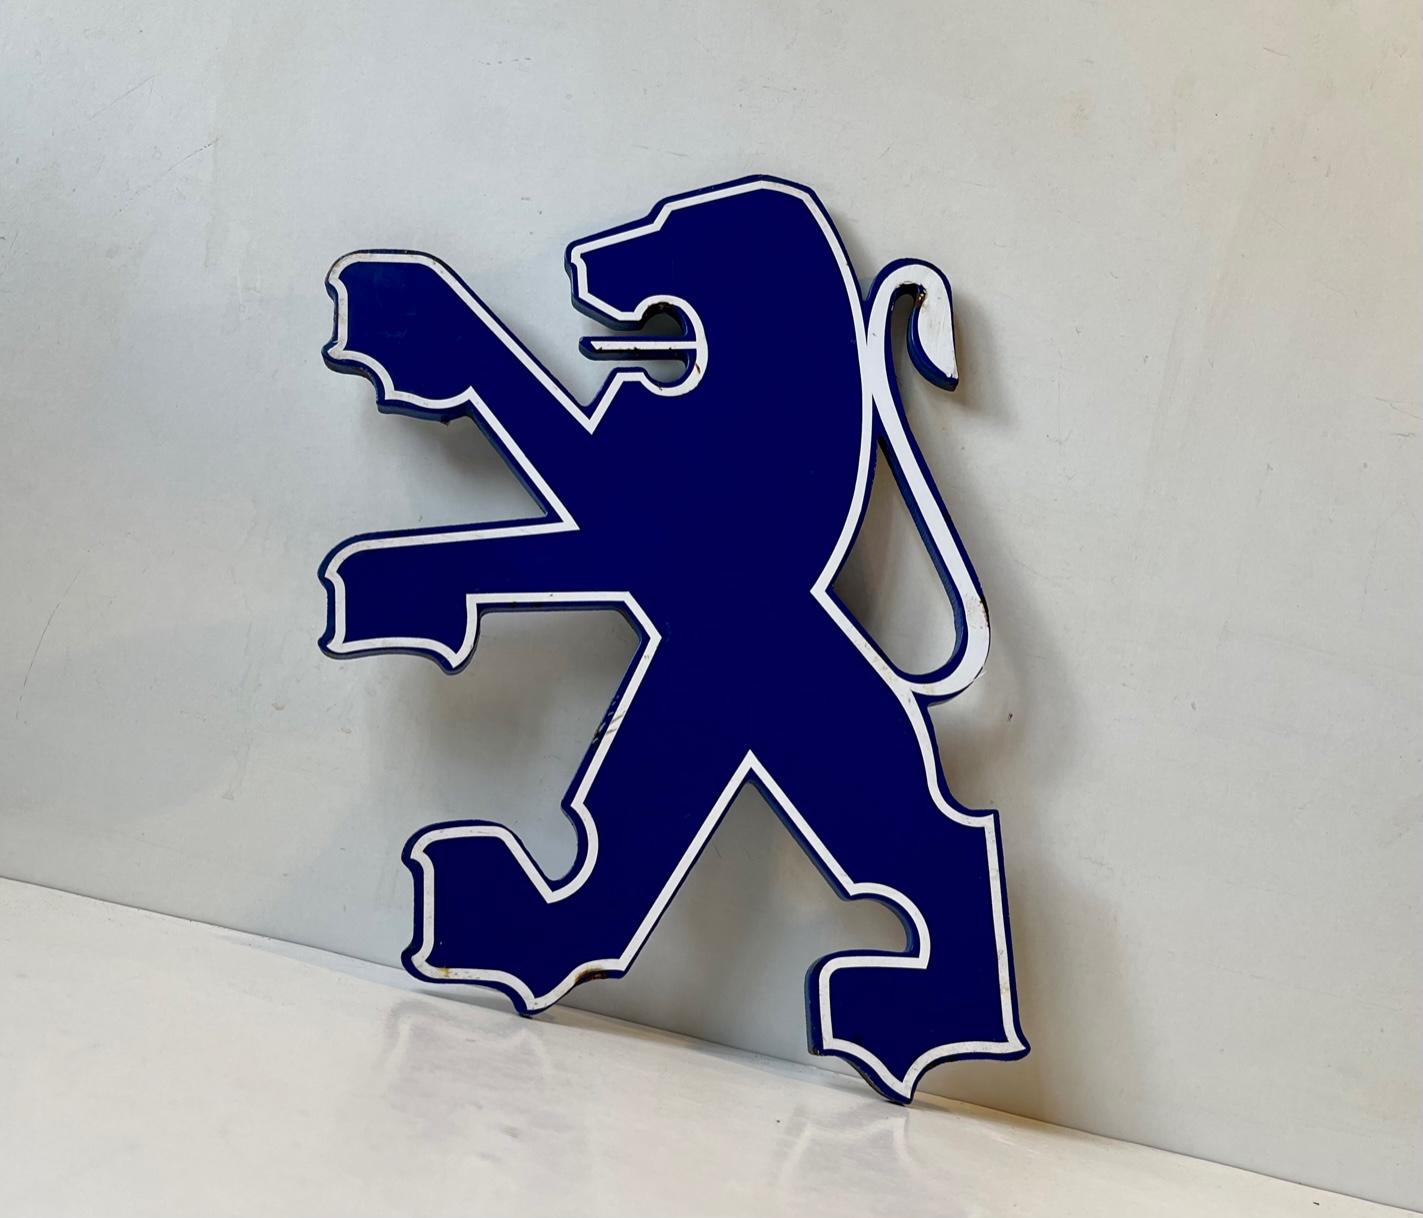 Late 20th Century Blue Lion, Vintage Enamel Sign from Peugeot France